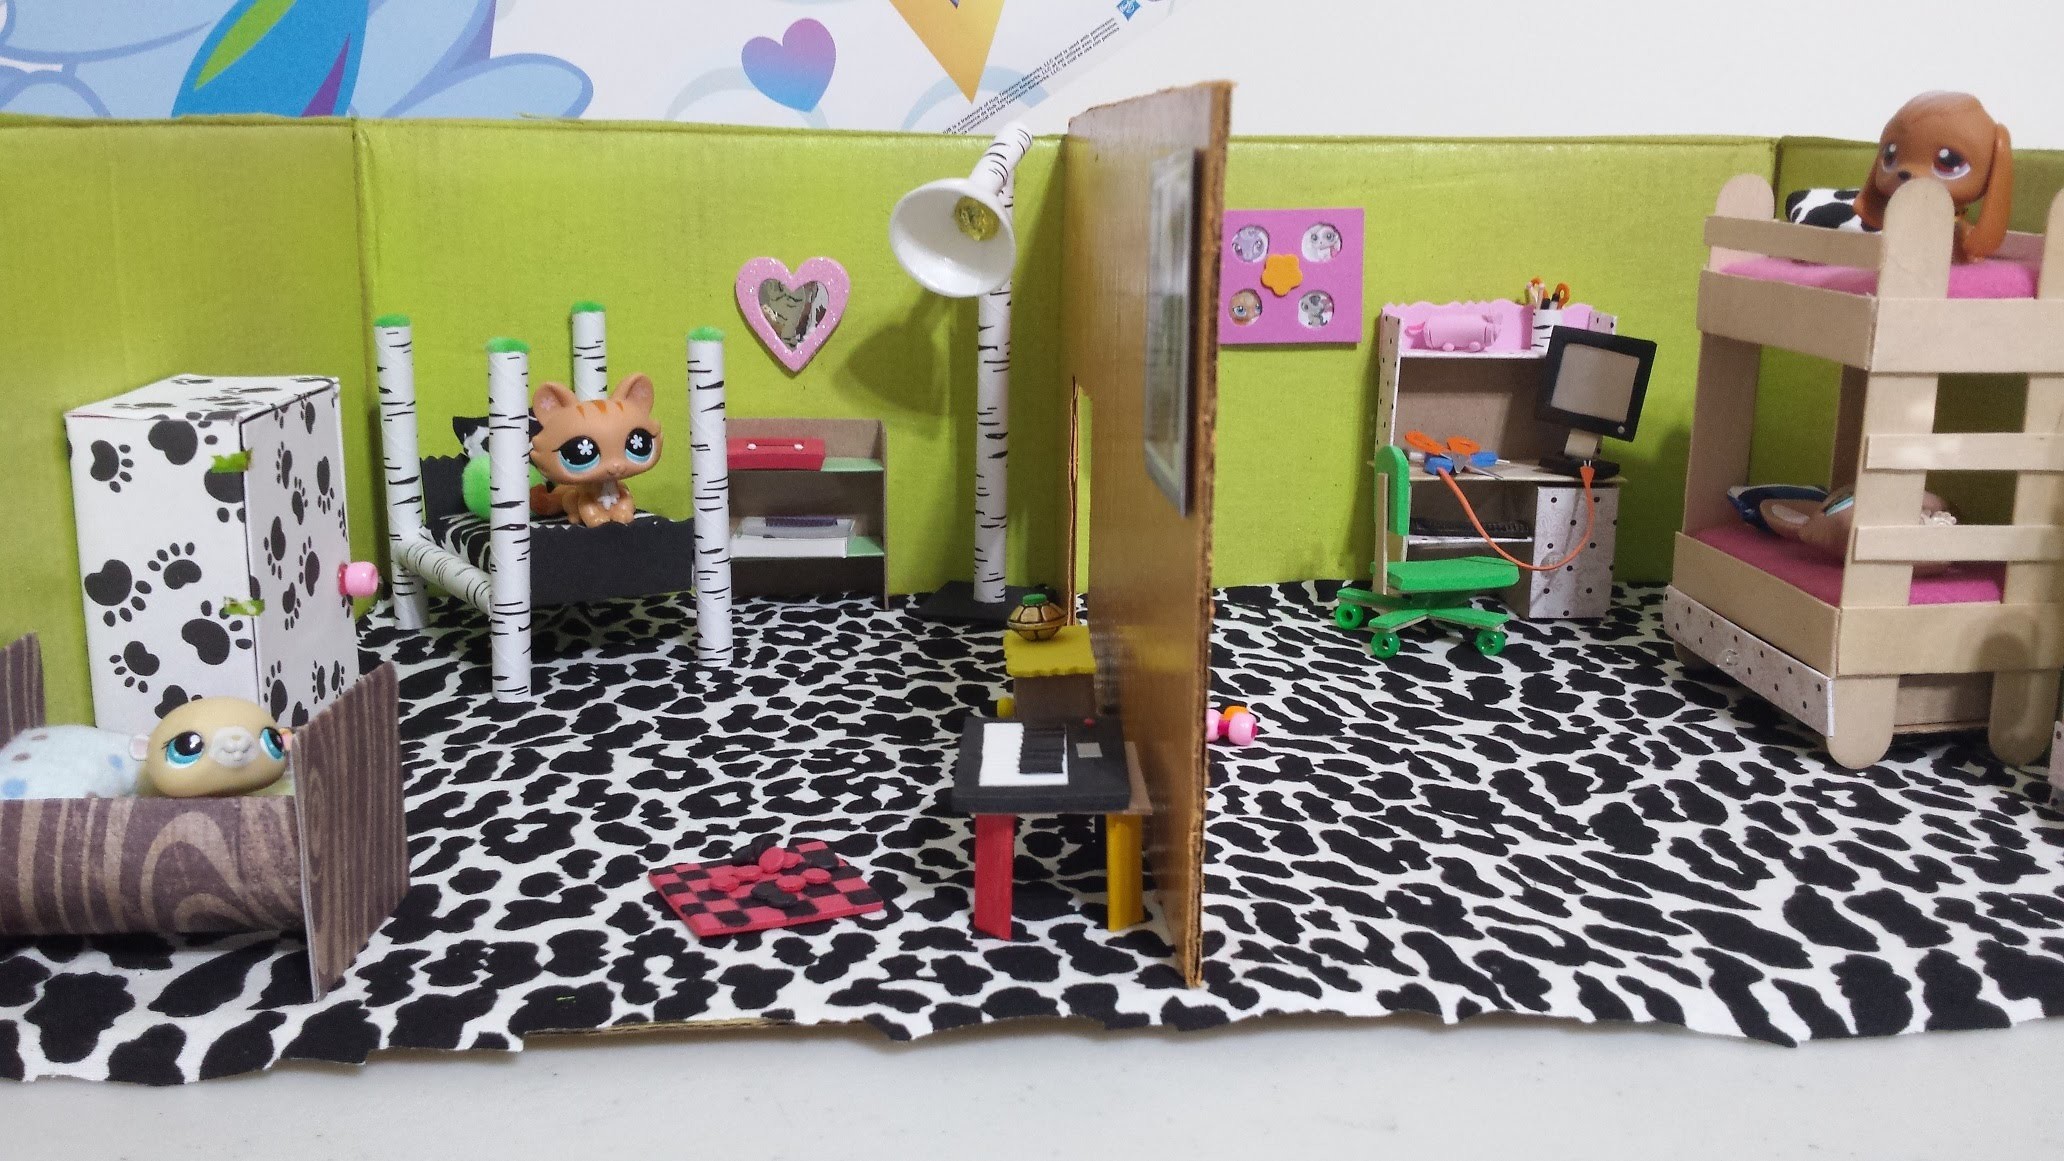 How to Make LPS Dollhouse Bedrooms: Doll DIY